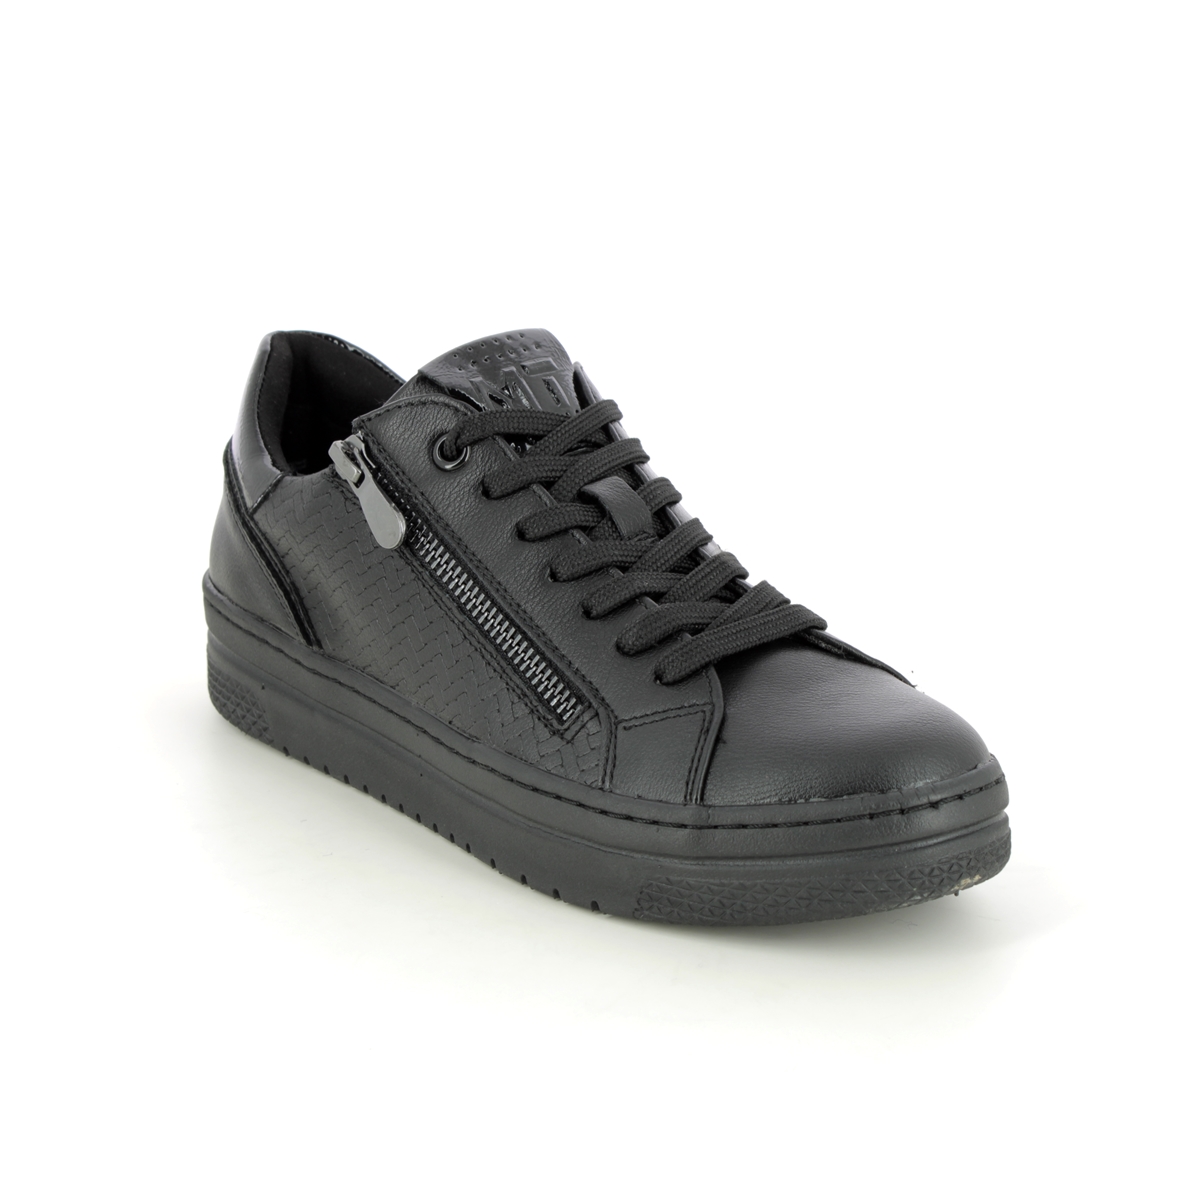 Marco Tozzi Raveen Black Womens Trainers 23709-29-098 In Size 38 In Plain Black